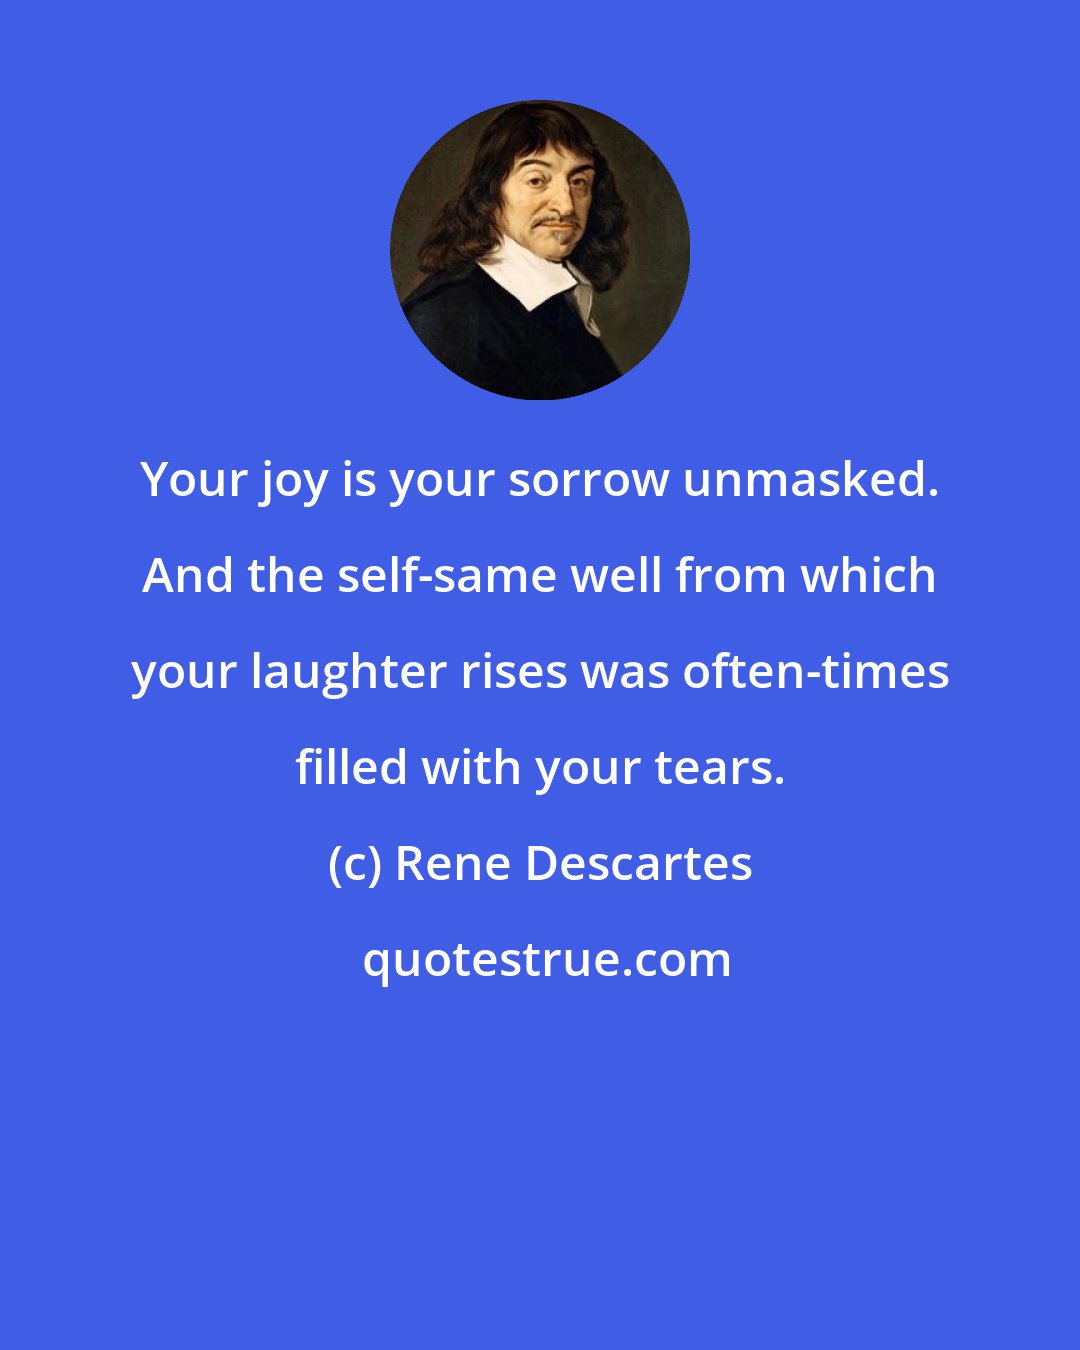 Rene Descartes: Your joy is your sorrow unmasked. And the self-same well from which your laughter rises was often-times filled with your tears.